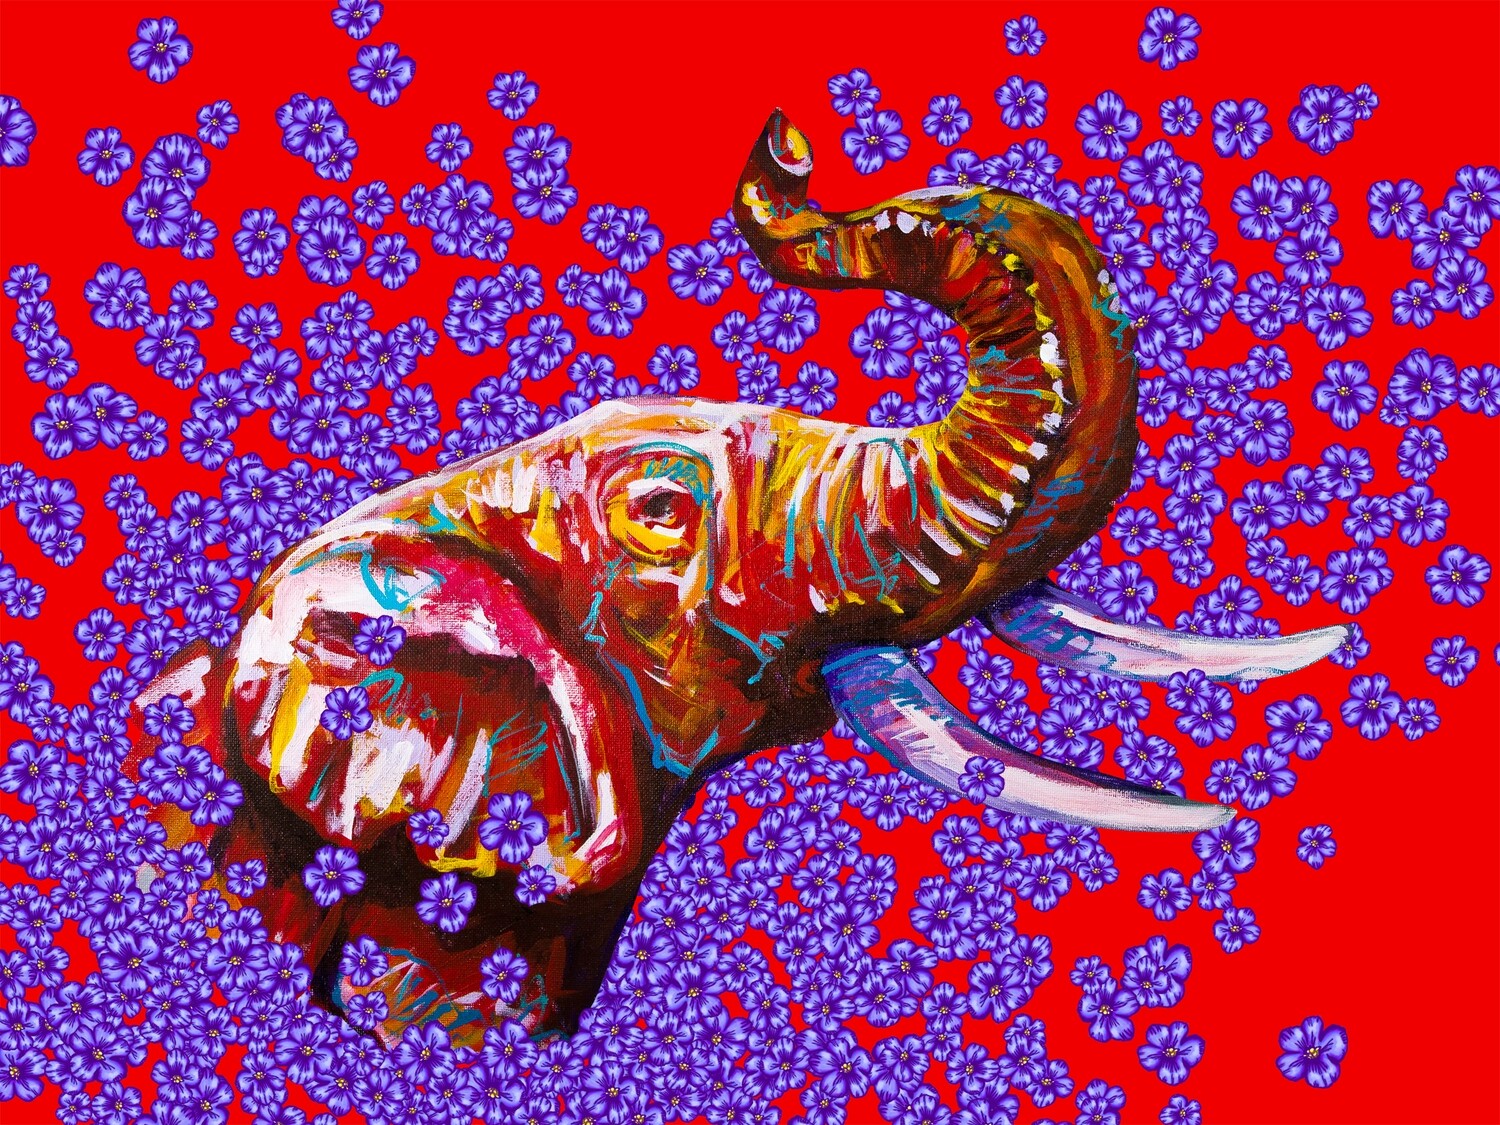 ELEPHANT IN VIOLETS